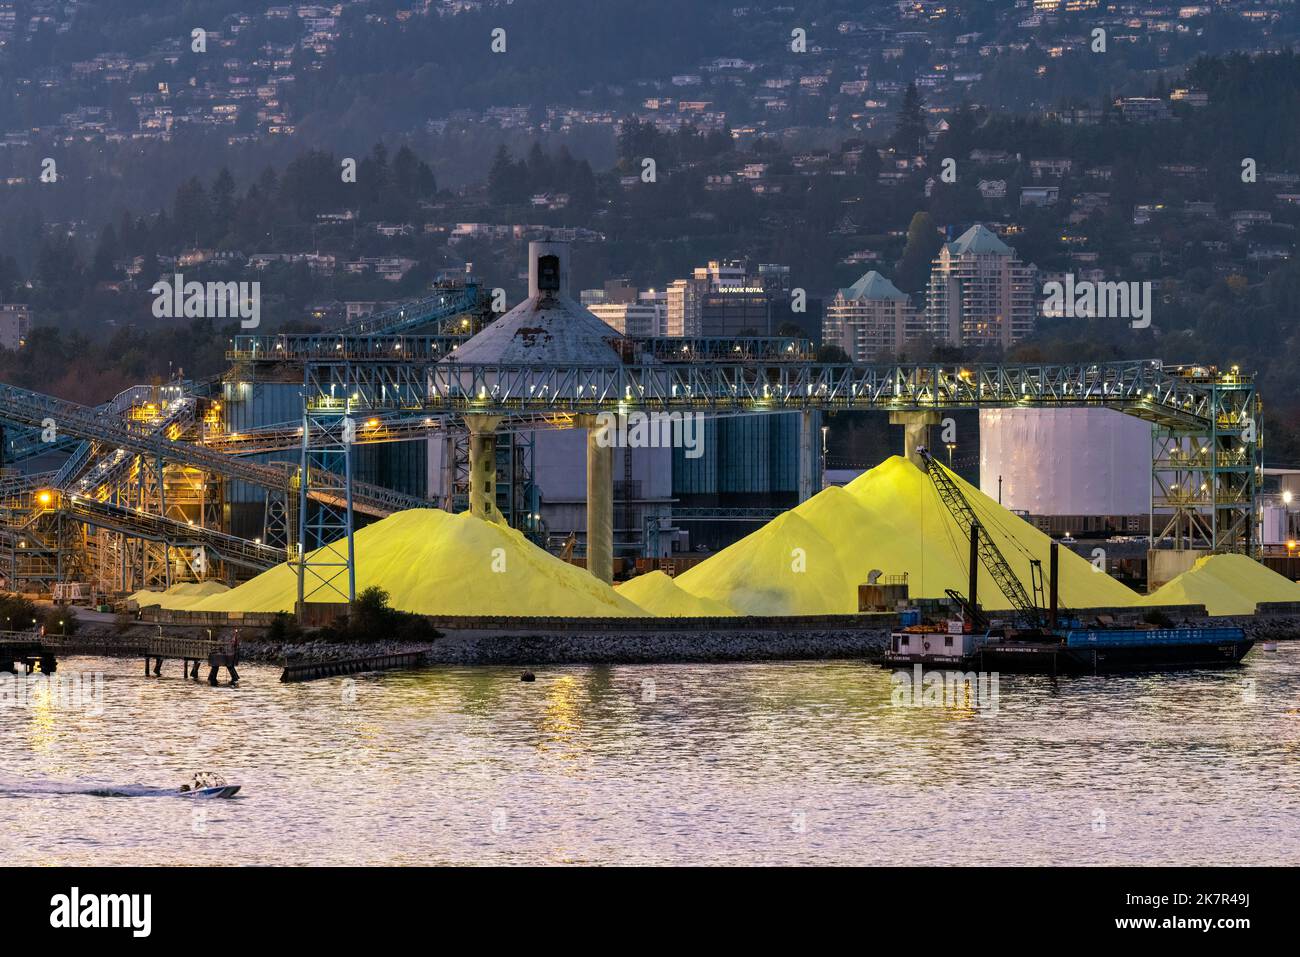 Piles of yellow sulfur at the North Vancouver Sulfur Works - North Vancouver, British Columbia, Canada Stock Photo